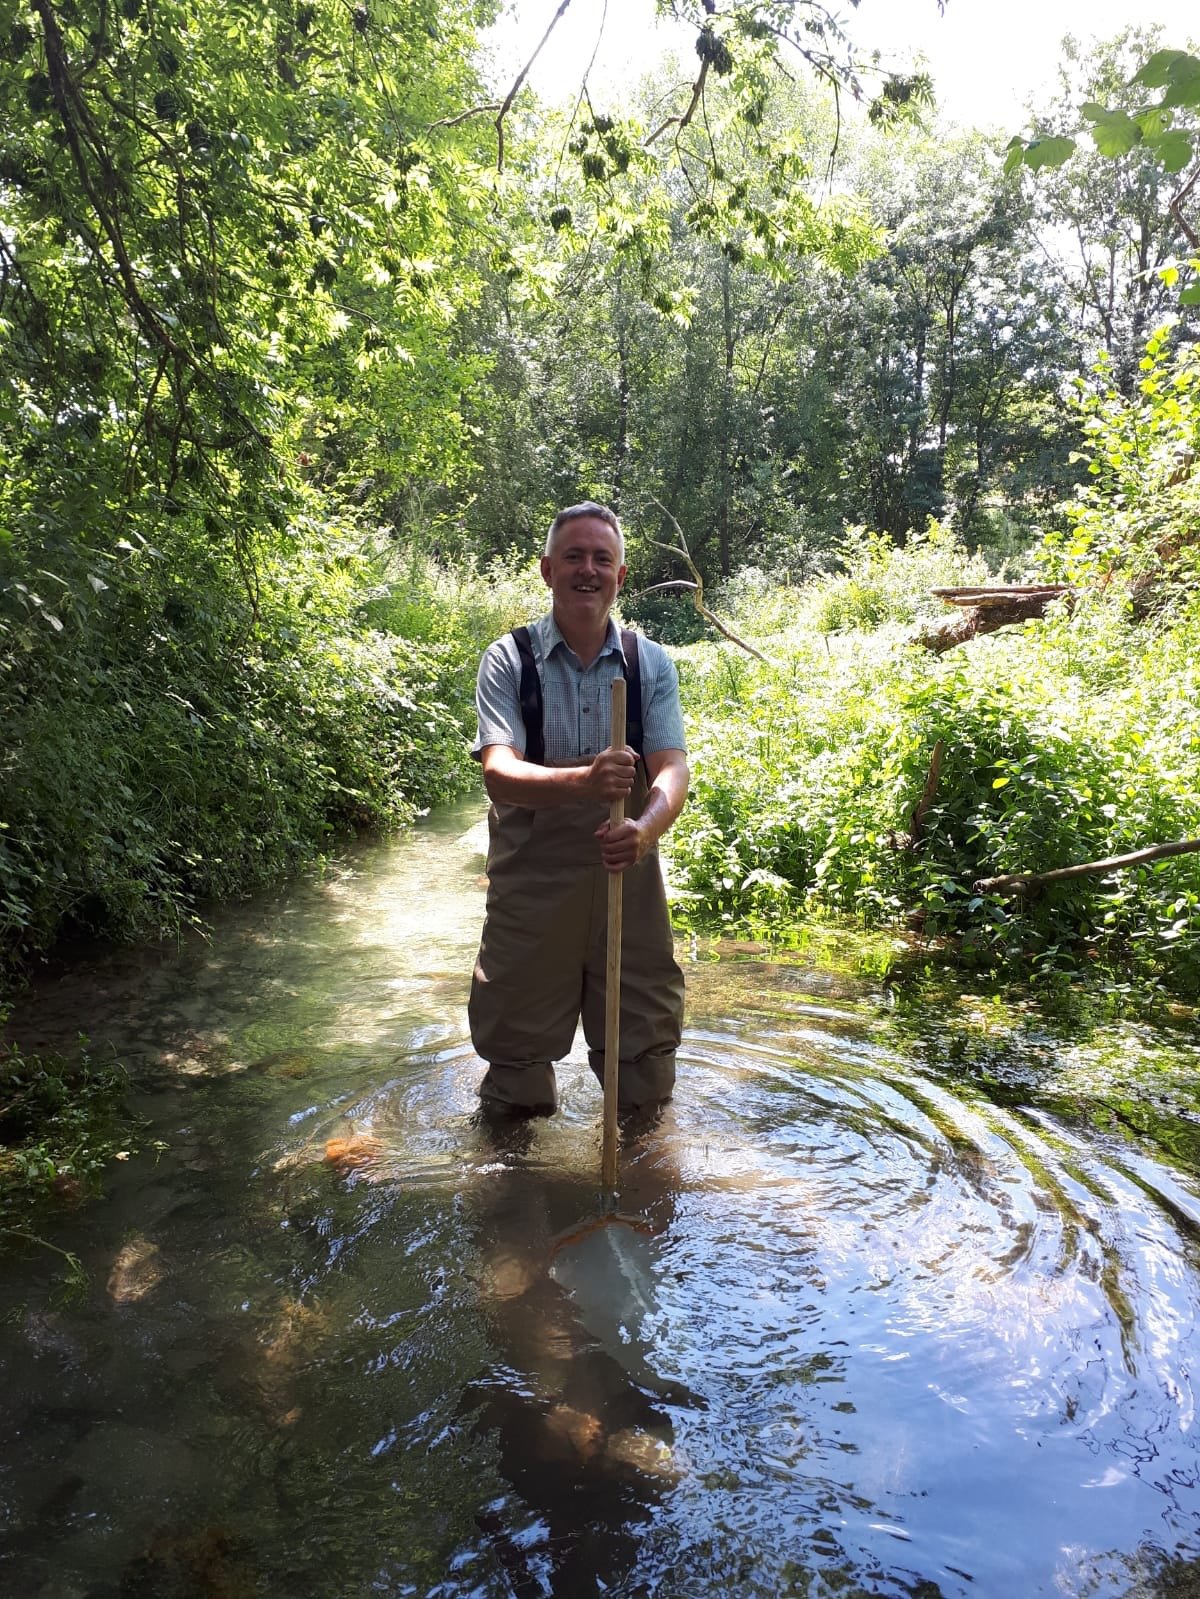 We are a small charity working with partners and the local community to protect and enhance the Letcombe Brook for both people and wildlife